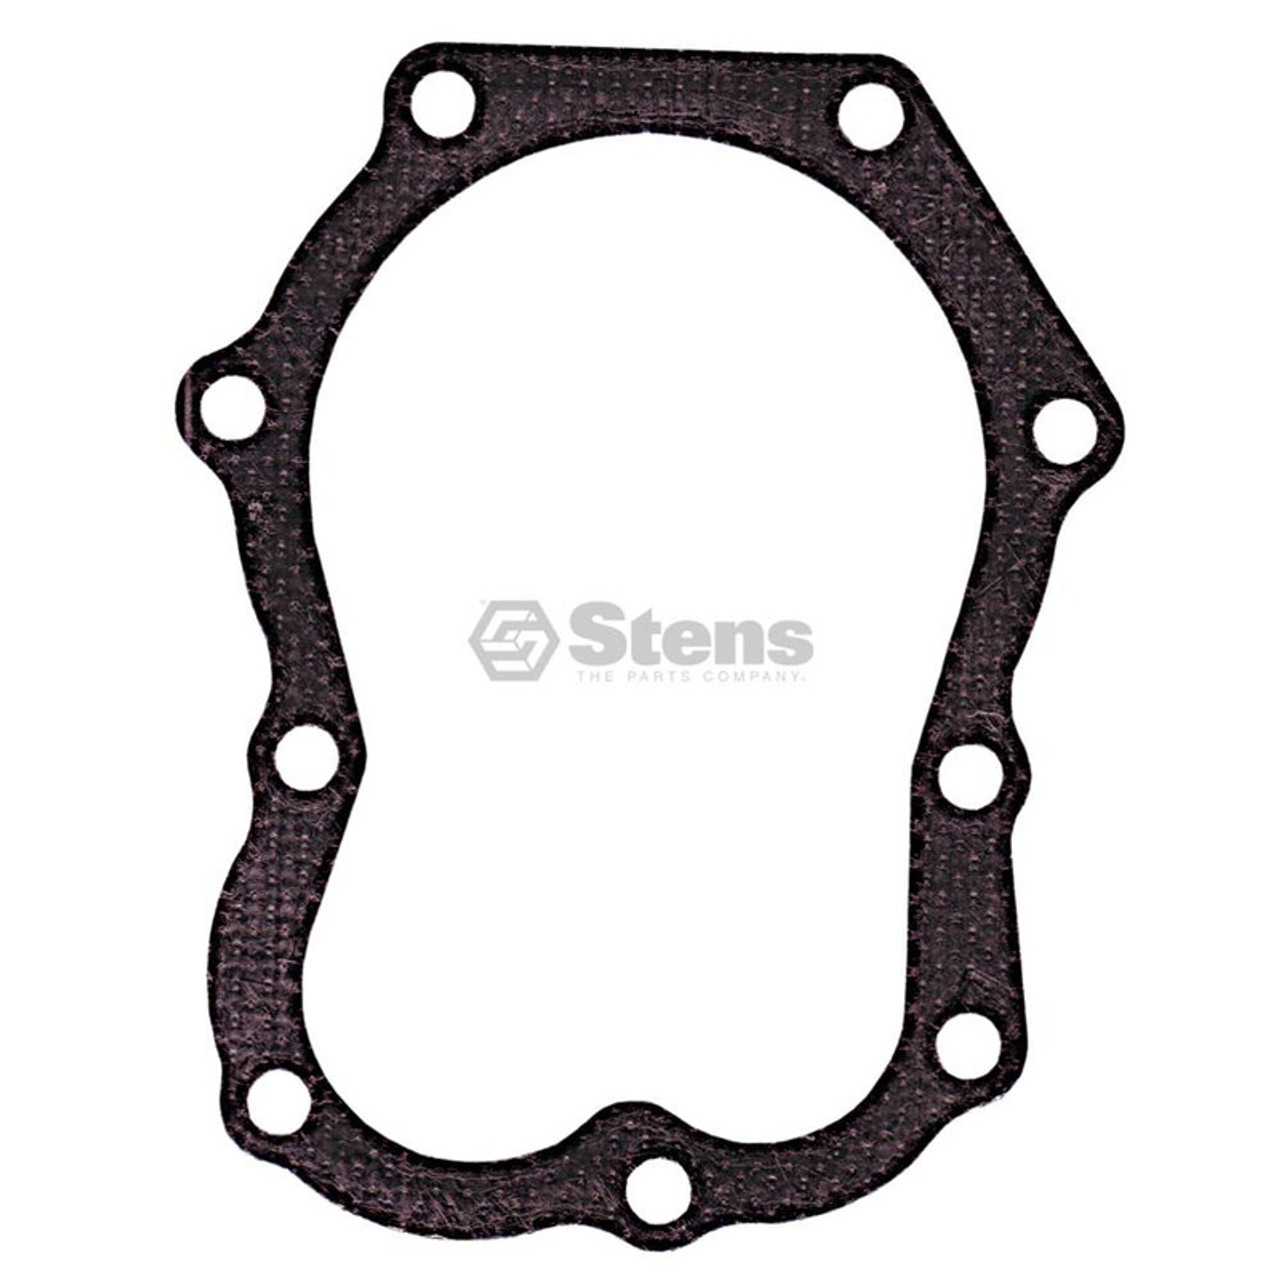 Briggs & Stratton 271867S Cylinder Head Gasket Replaces 271867S by Magneto Power 